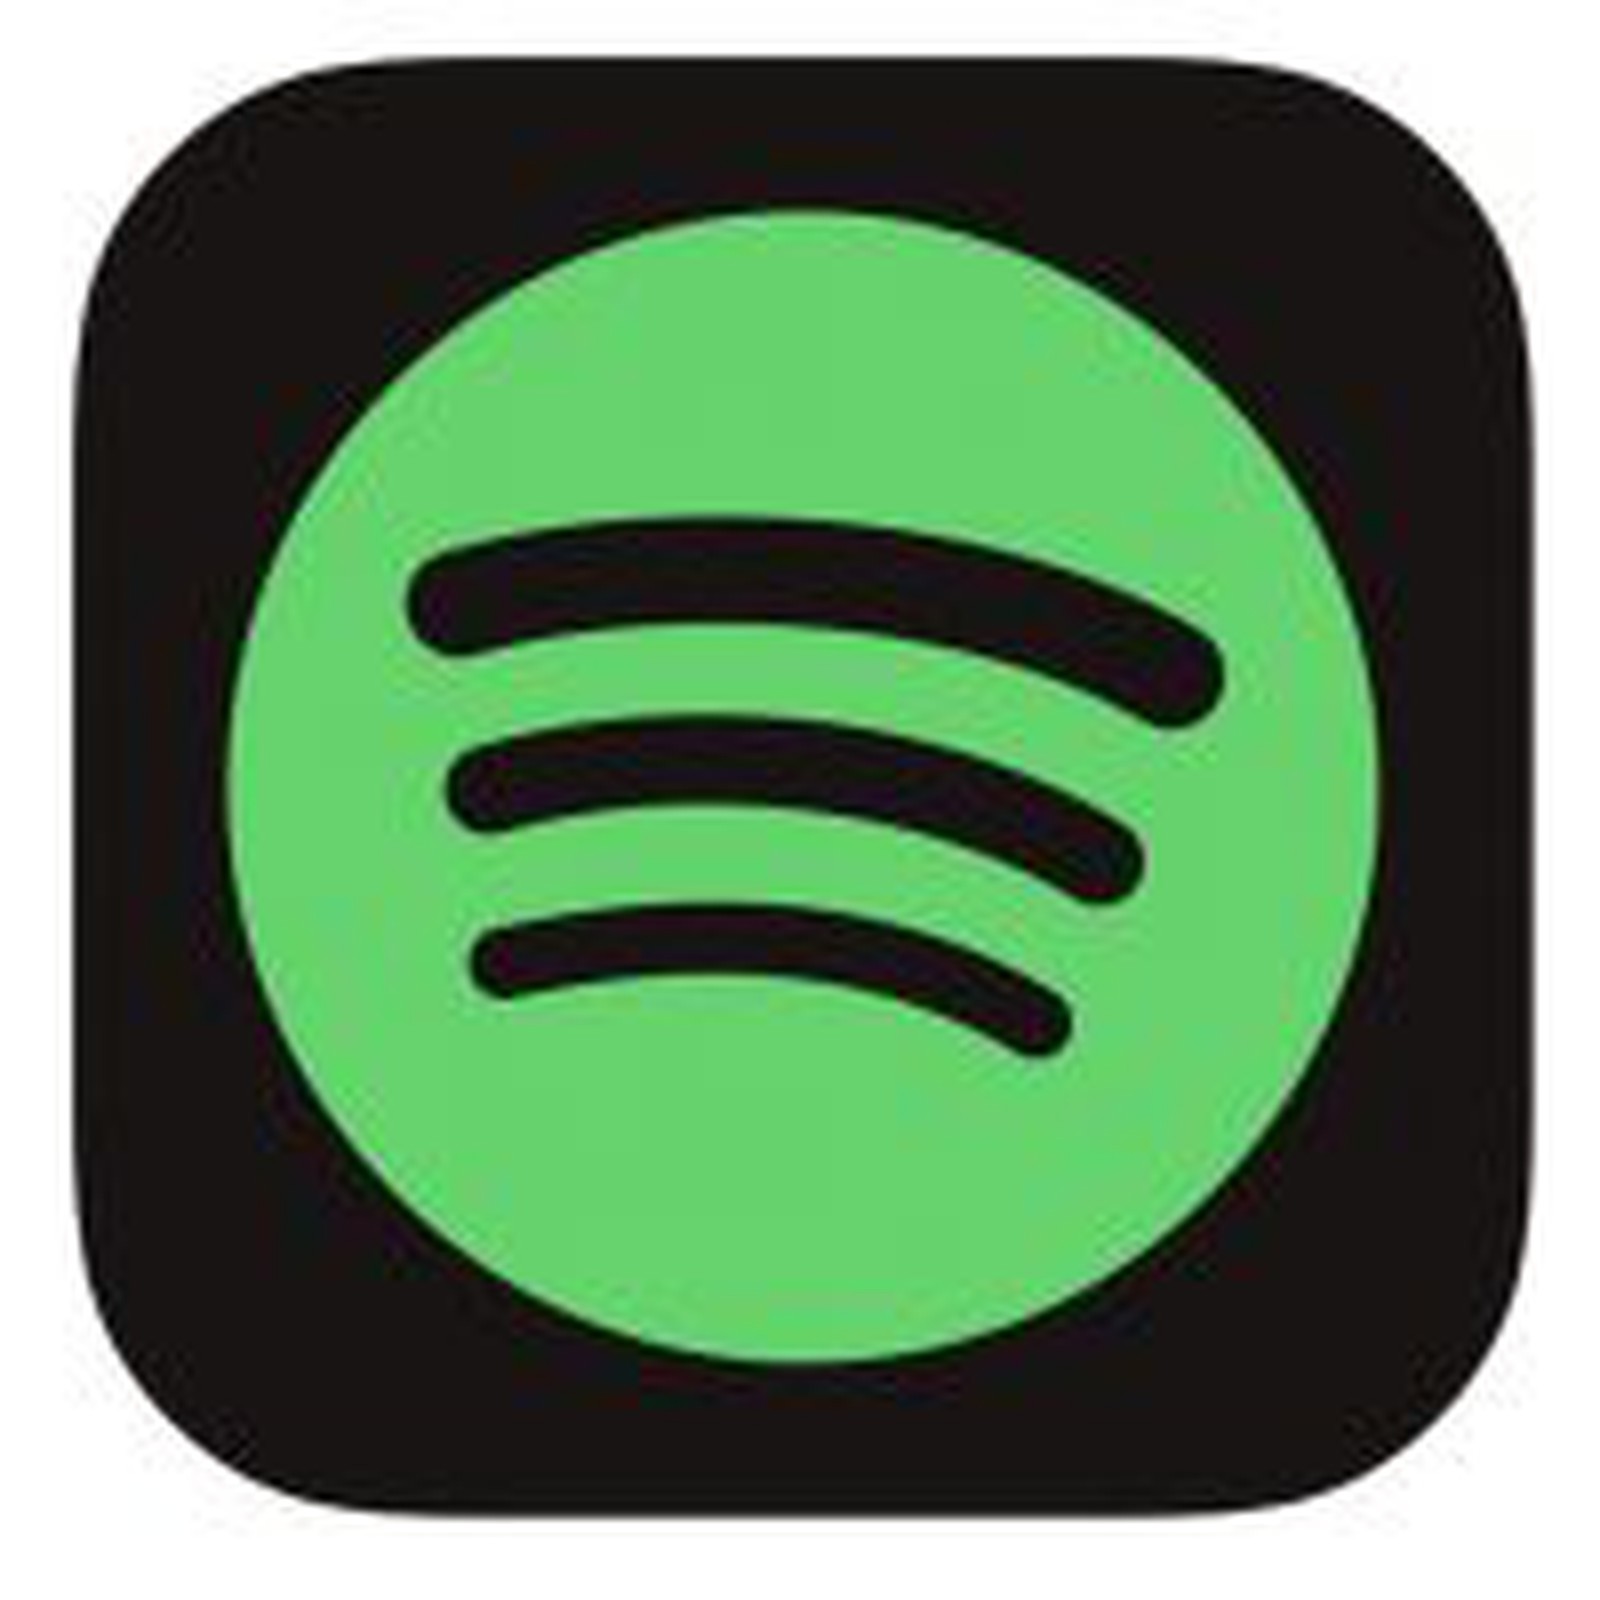 Spotify 1.2.14.1141 for apple download